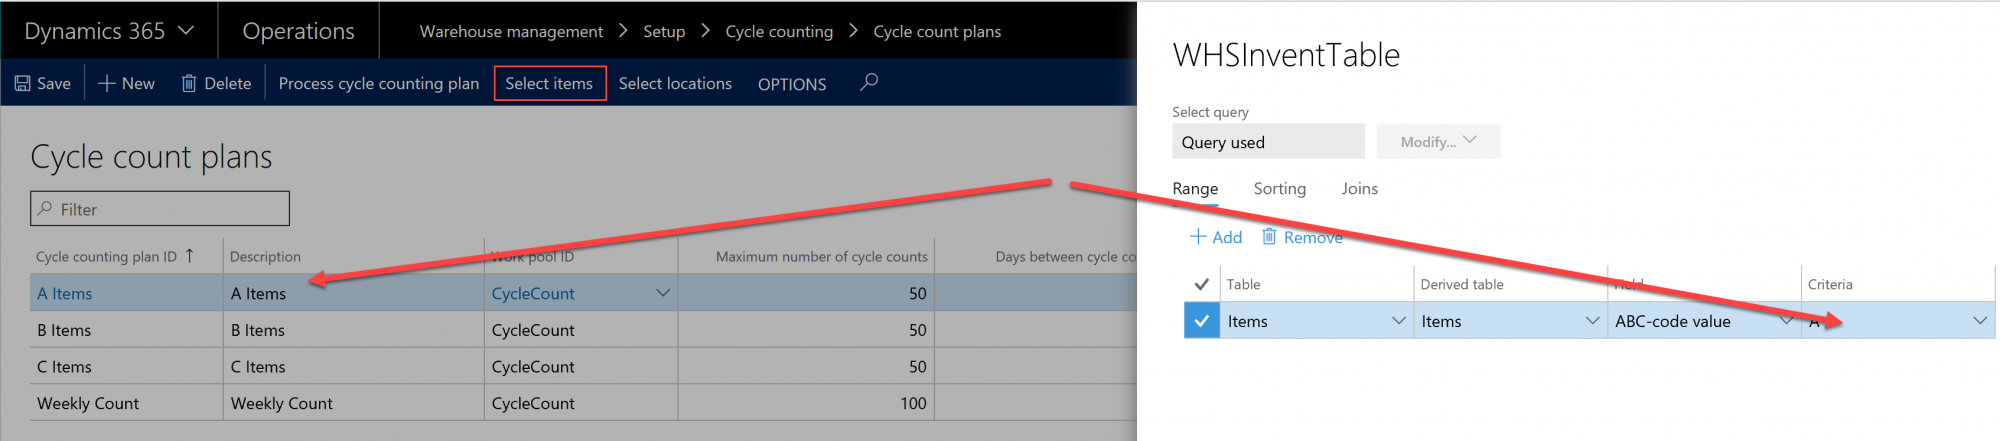 D365 Cycle Count Plans Screenshot 2